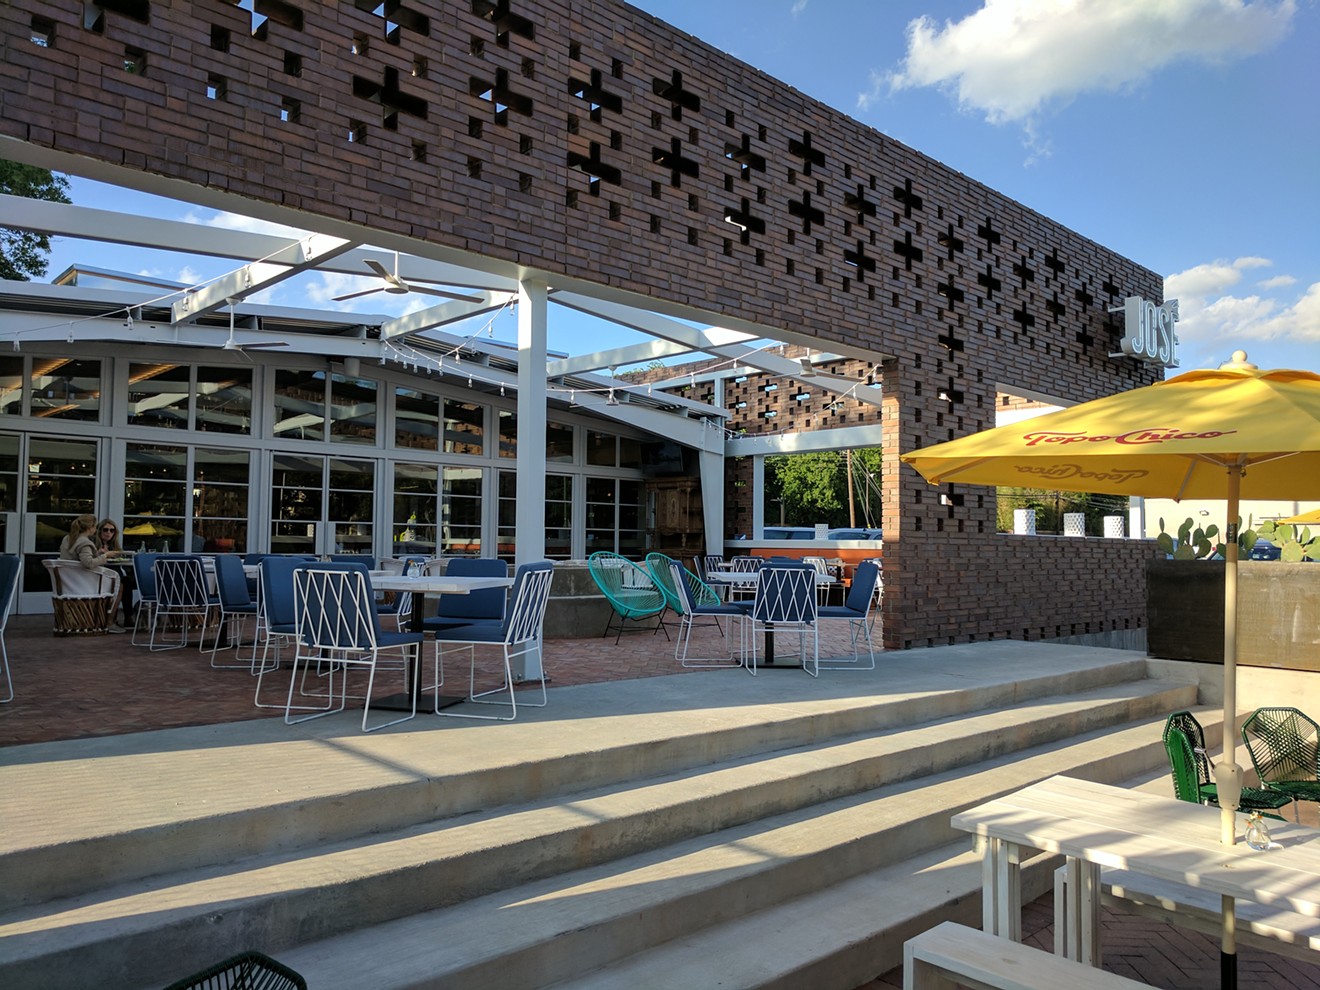 The spacious patio will be perfect for fall weather and margaritas.